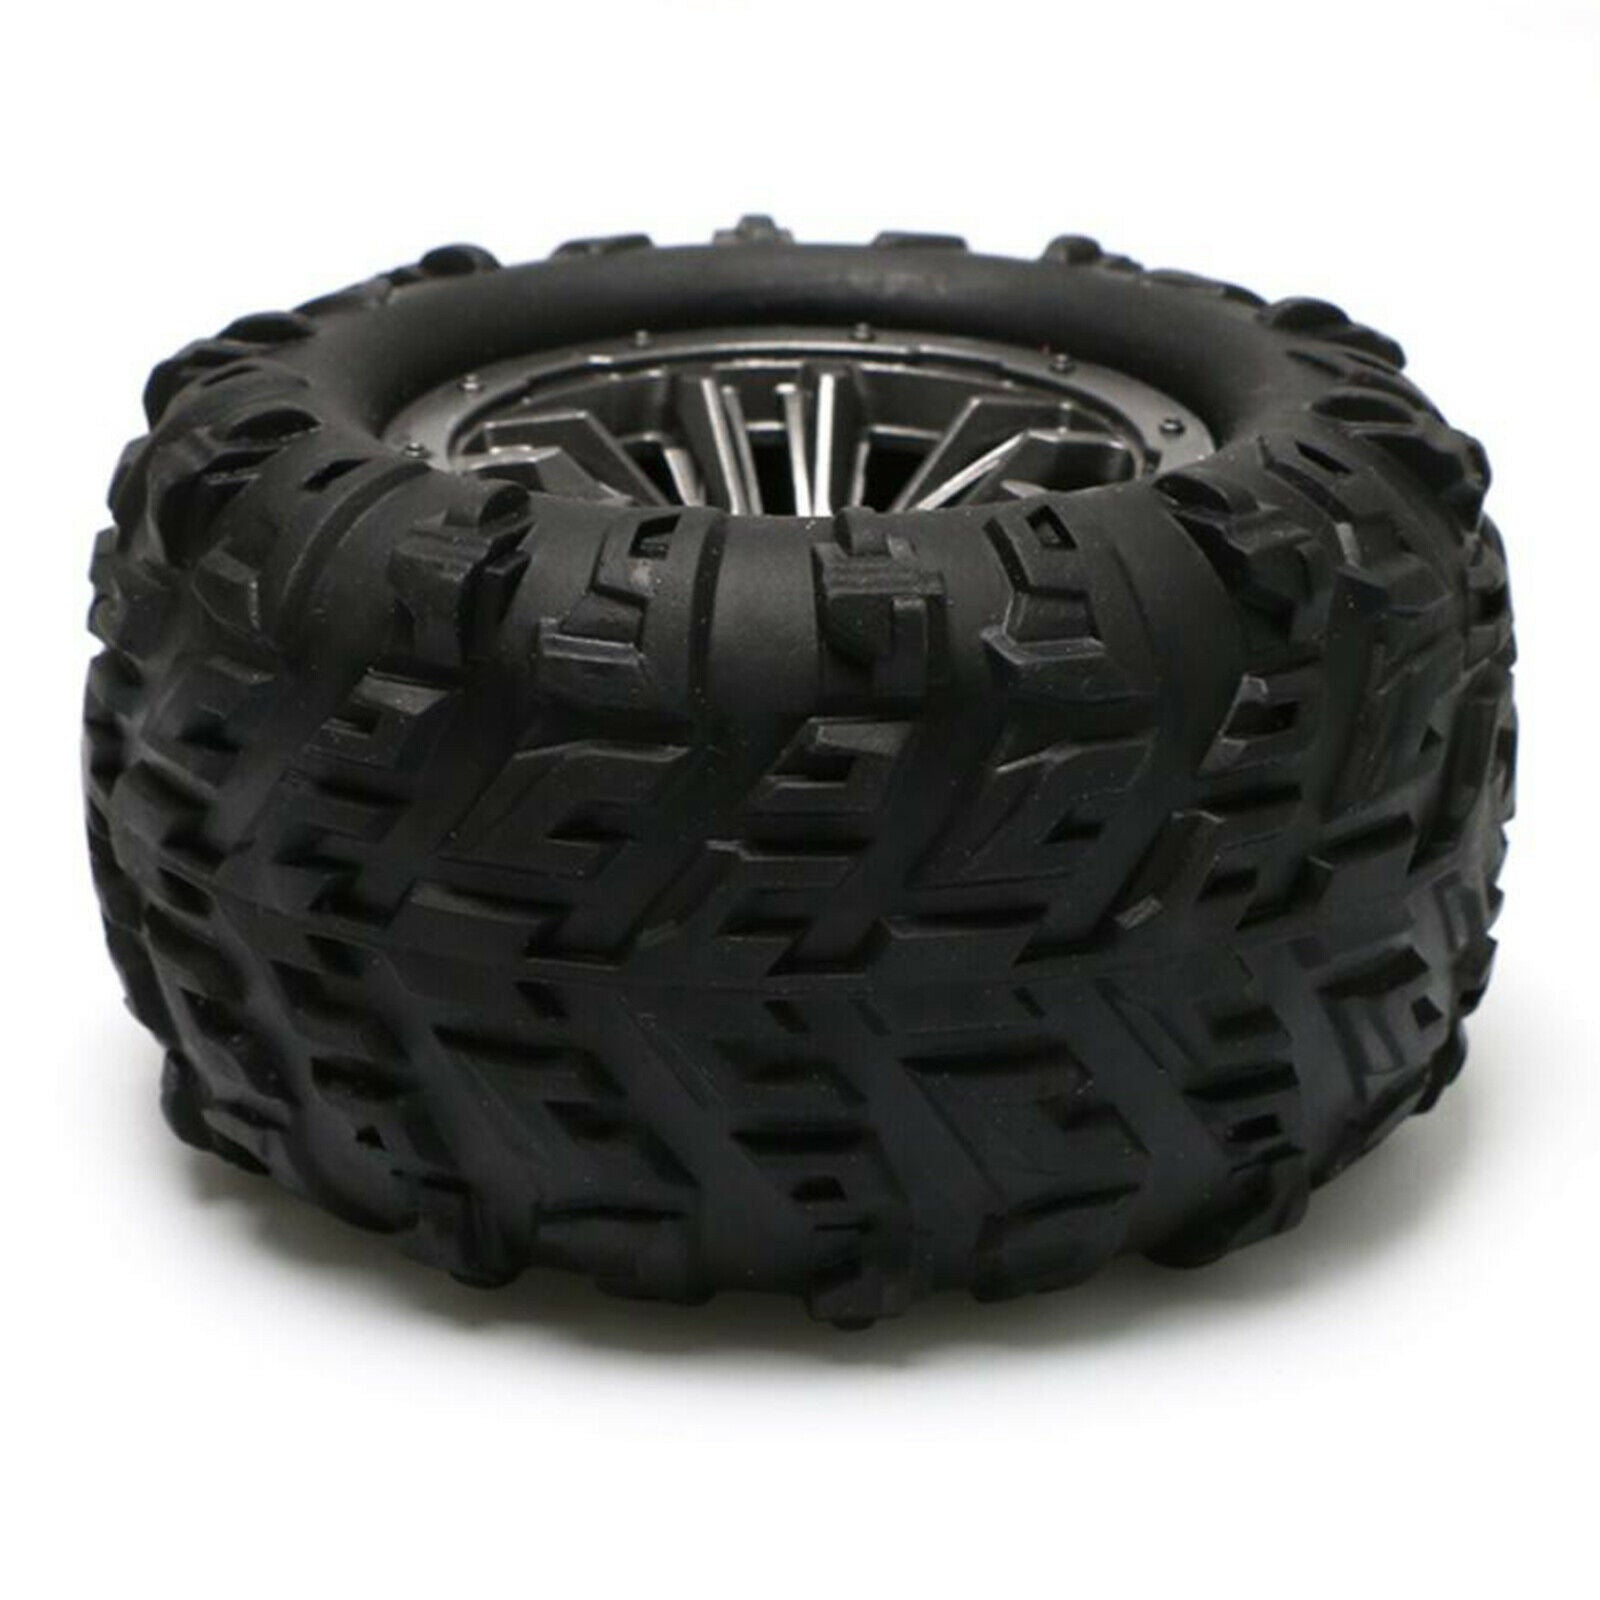 RC Car Rubber Tyres with Wheel Rims for Wltoys 12428 12423 1:12 RC Crawler